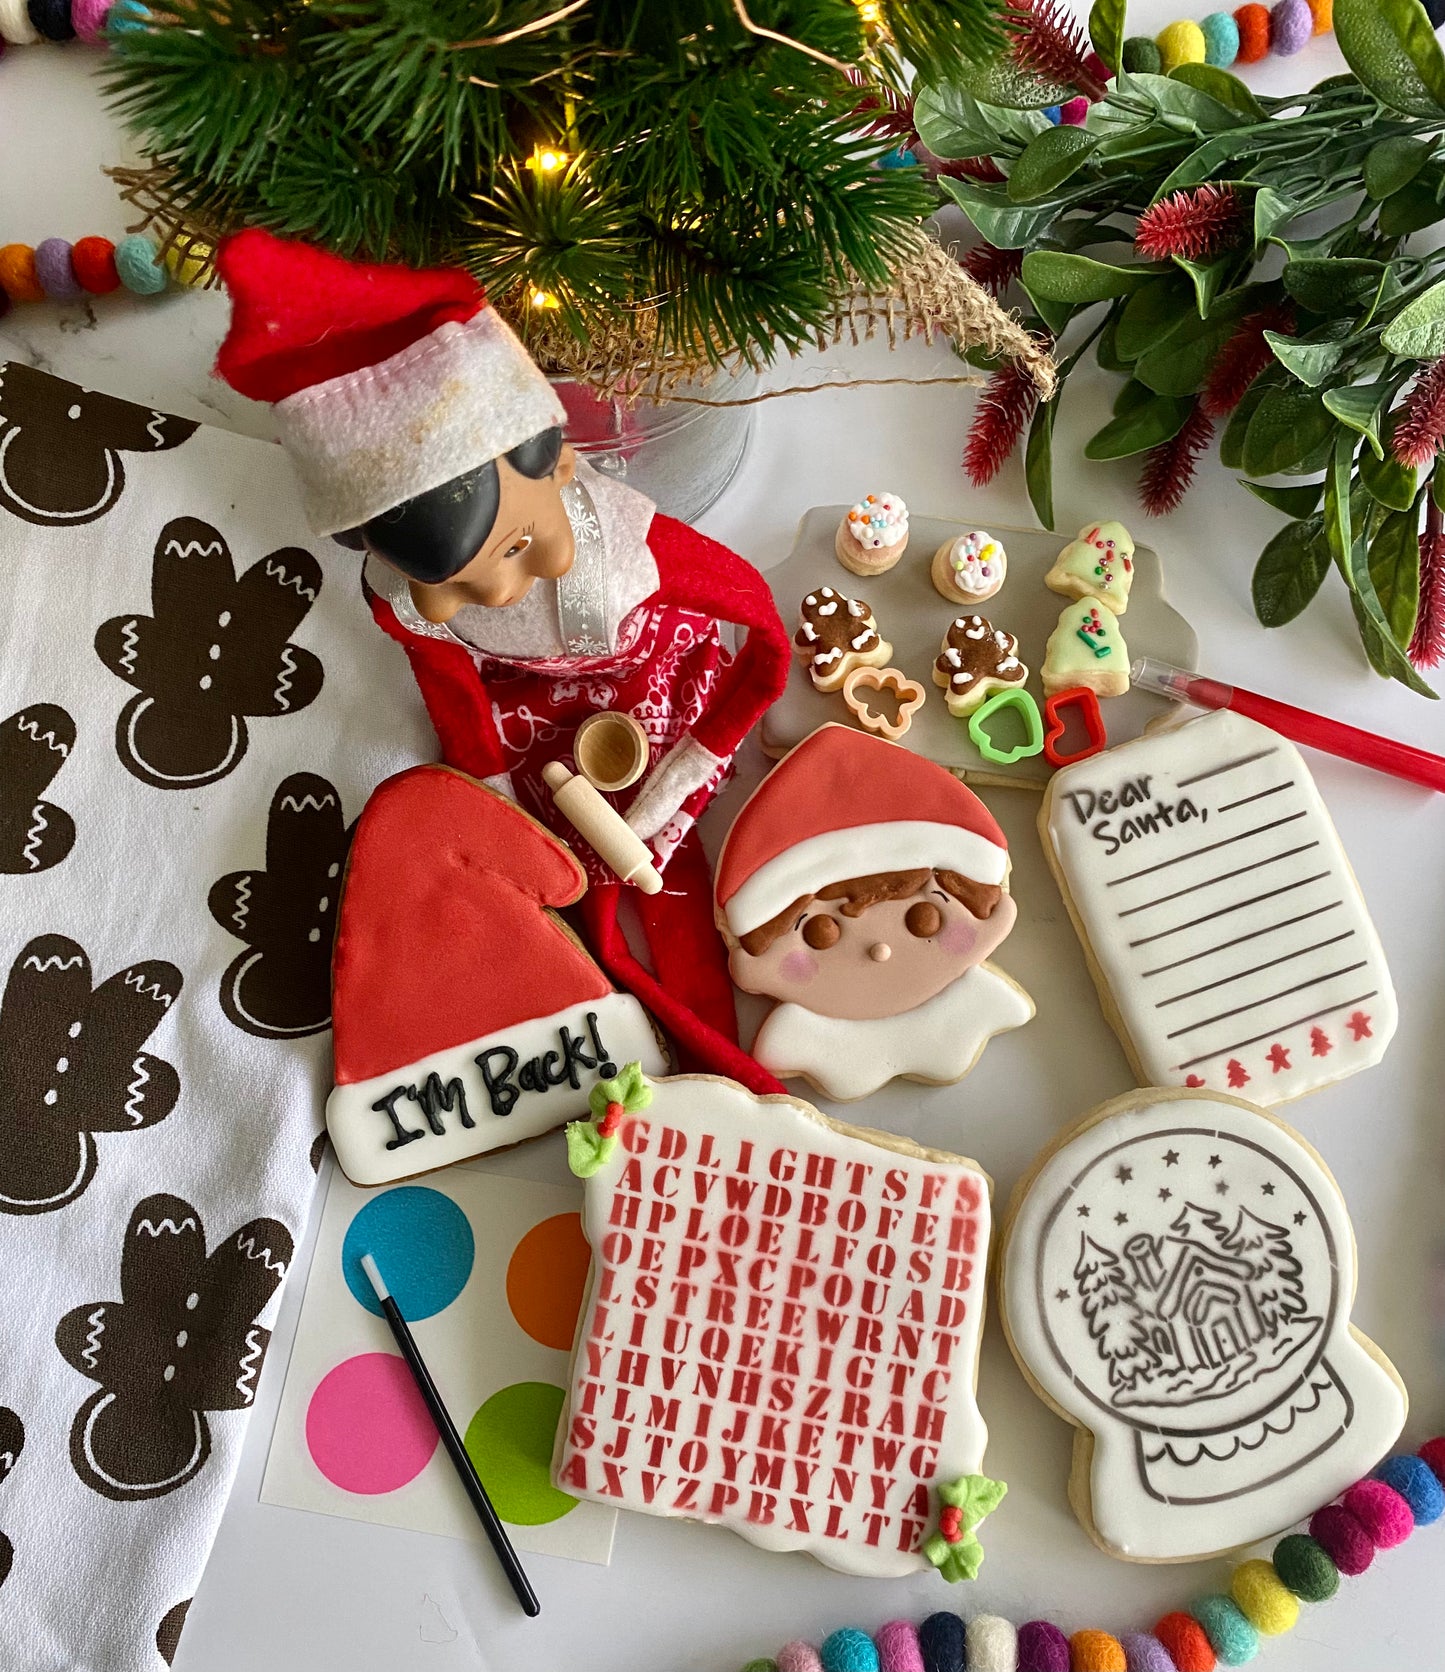 "I'm Back" Elf cookie and cookie activity box